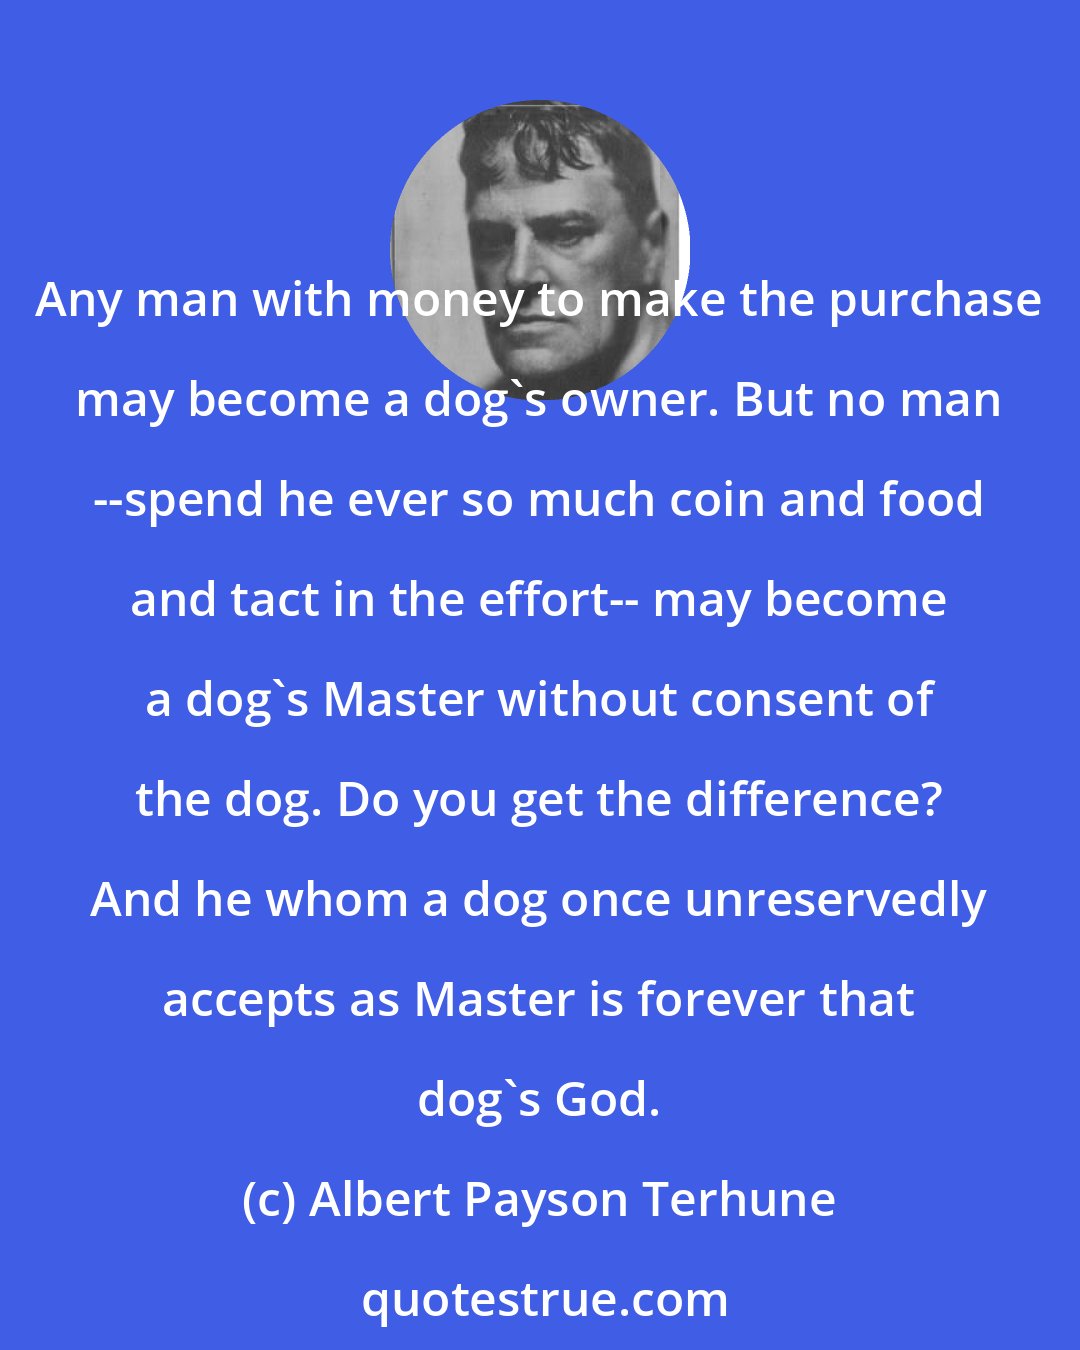 Albert Payson Terhune: Any man with money to make the purchase may become a dog's owner. But no man --spend he ever so much coin and food and tact in the effort-- may become a dog's Master without consent of the dog. Do you get the difference? And he whom a dog once unreservedly accepts as Master is forever that dog's God.